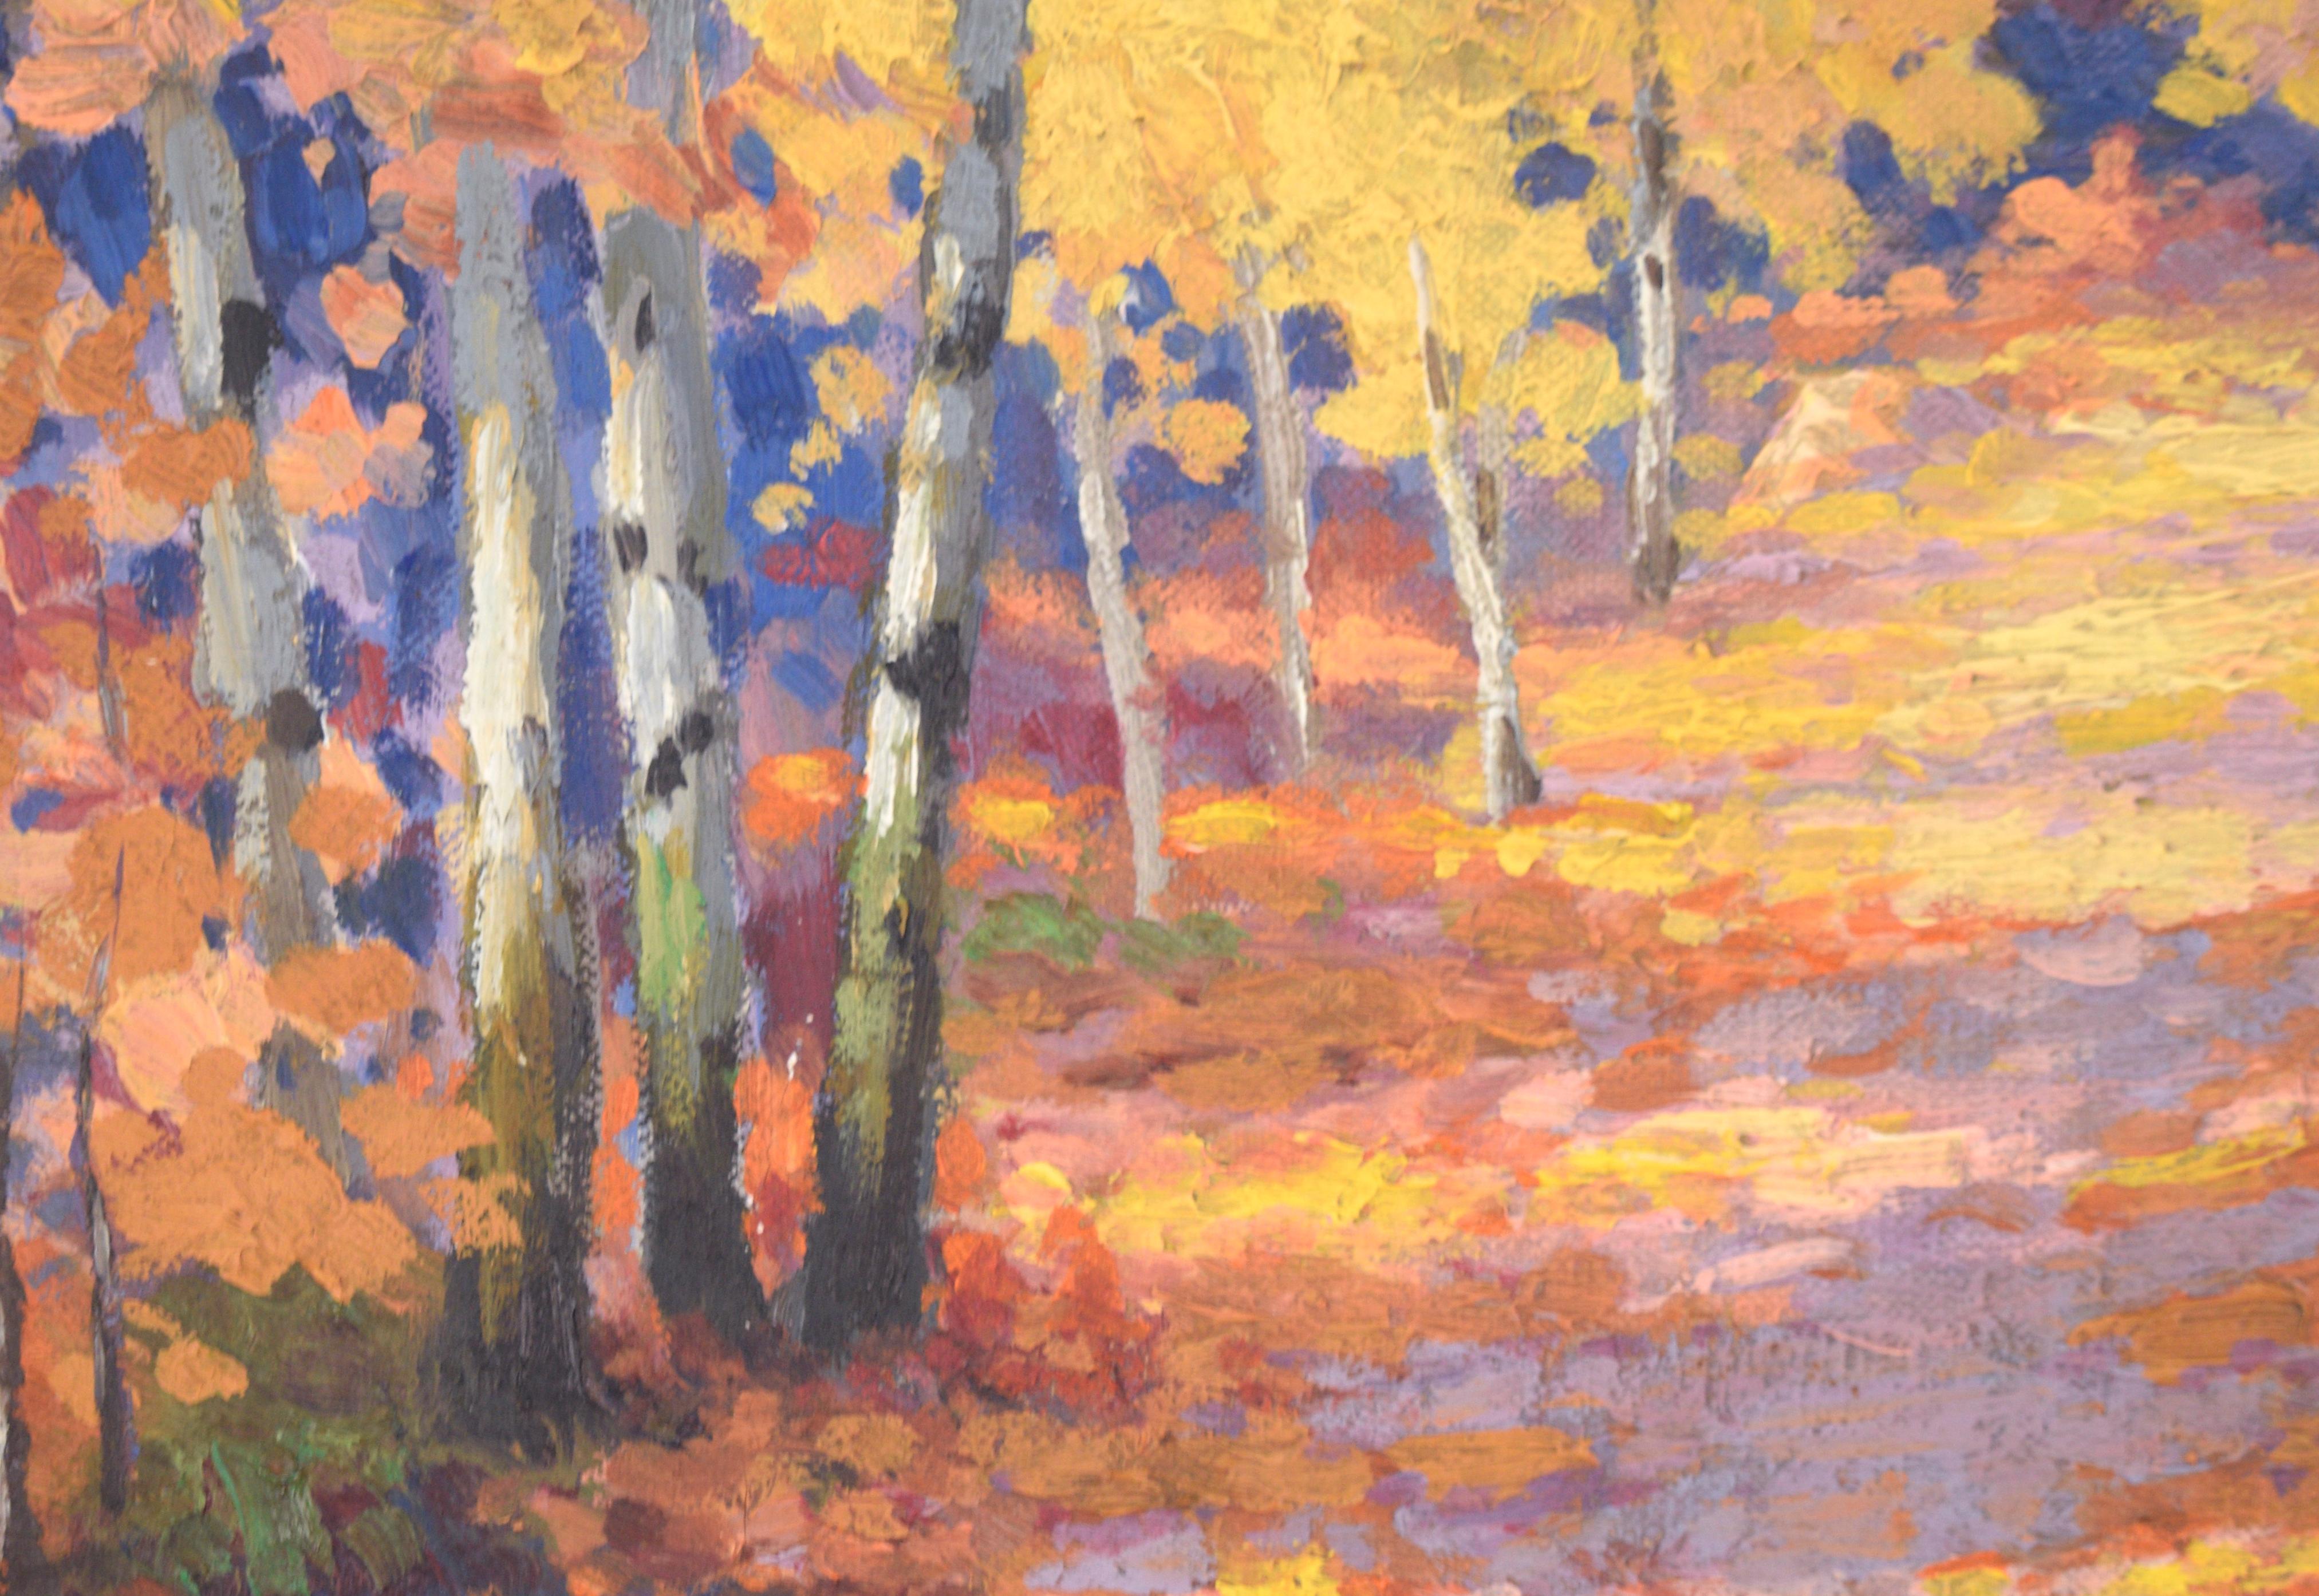 Fallen Leaves on the Path at Estes Park, Colorado - Autumn Landscape
Skillful and vibrant vertical landscape by MC Brown. A path winds through an aspen forest, covered with yellow and orange leaves. Aspens frame both sides of the composition, full